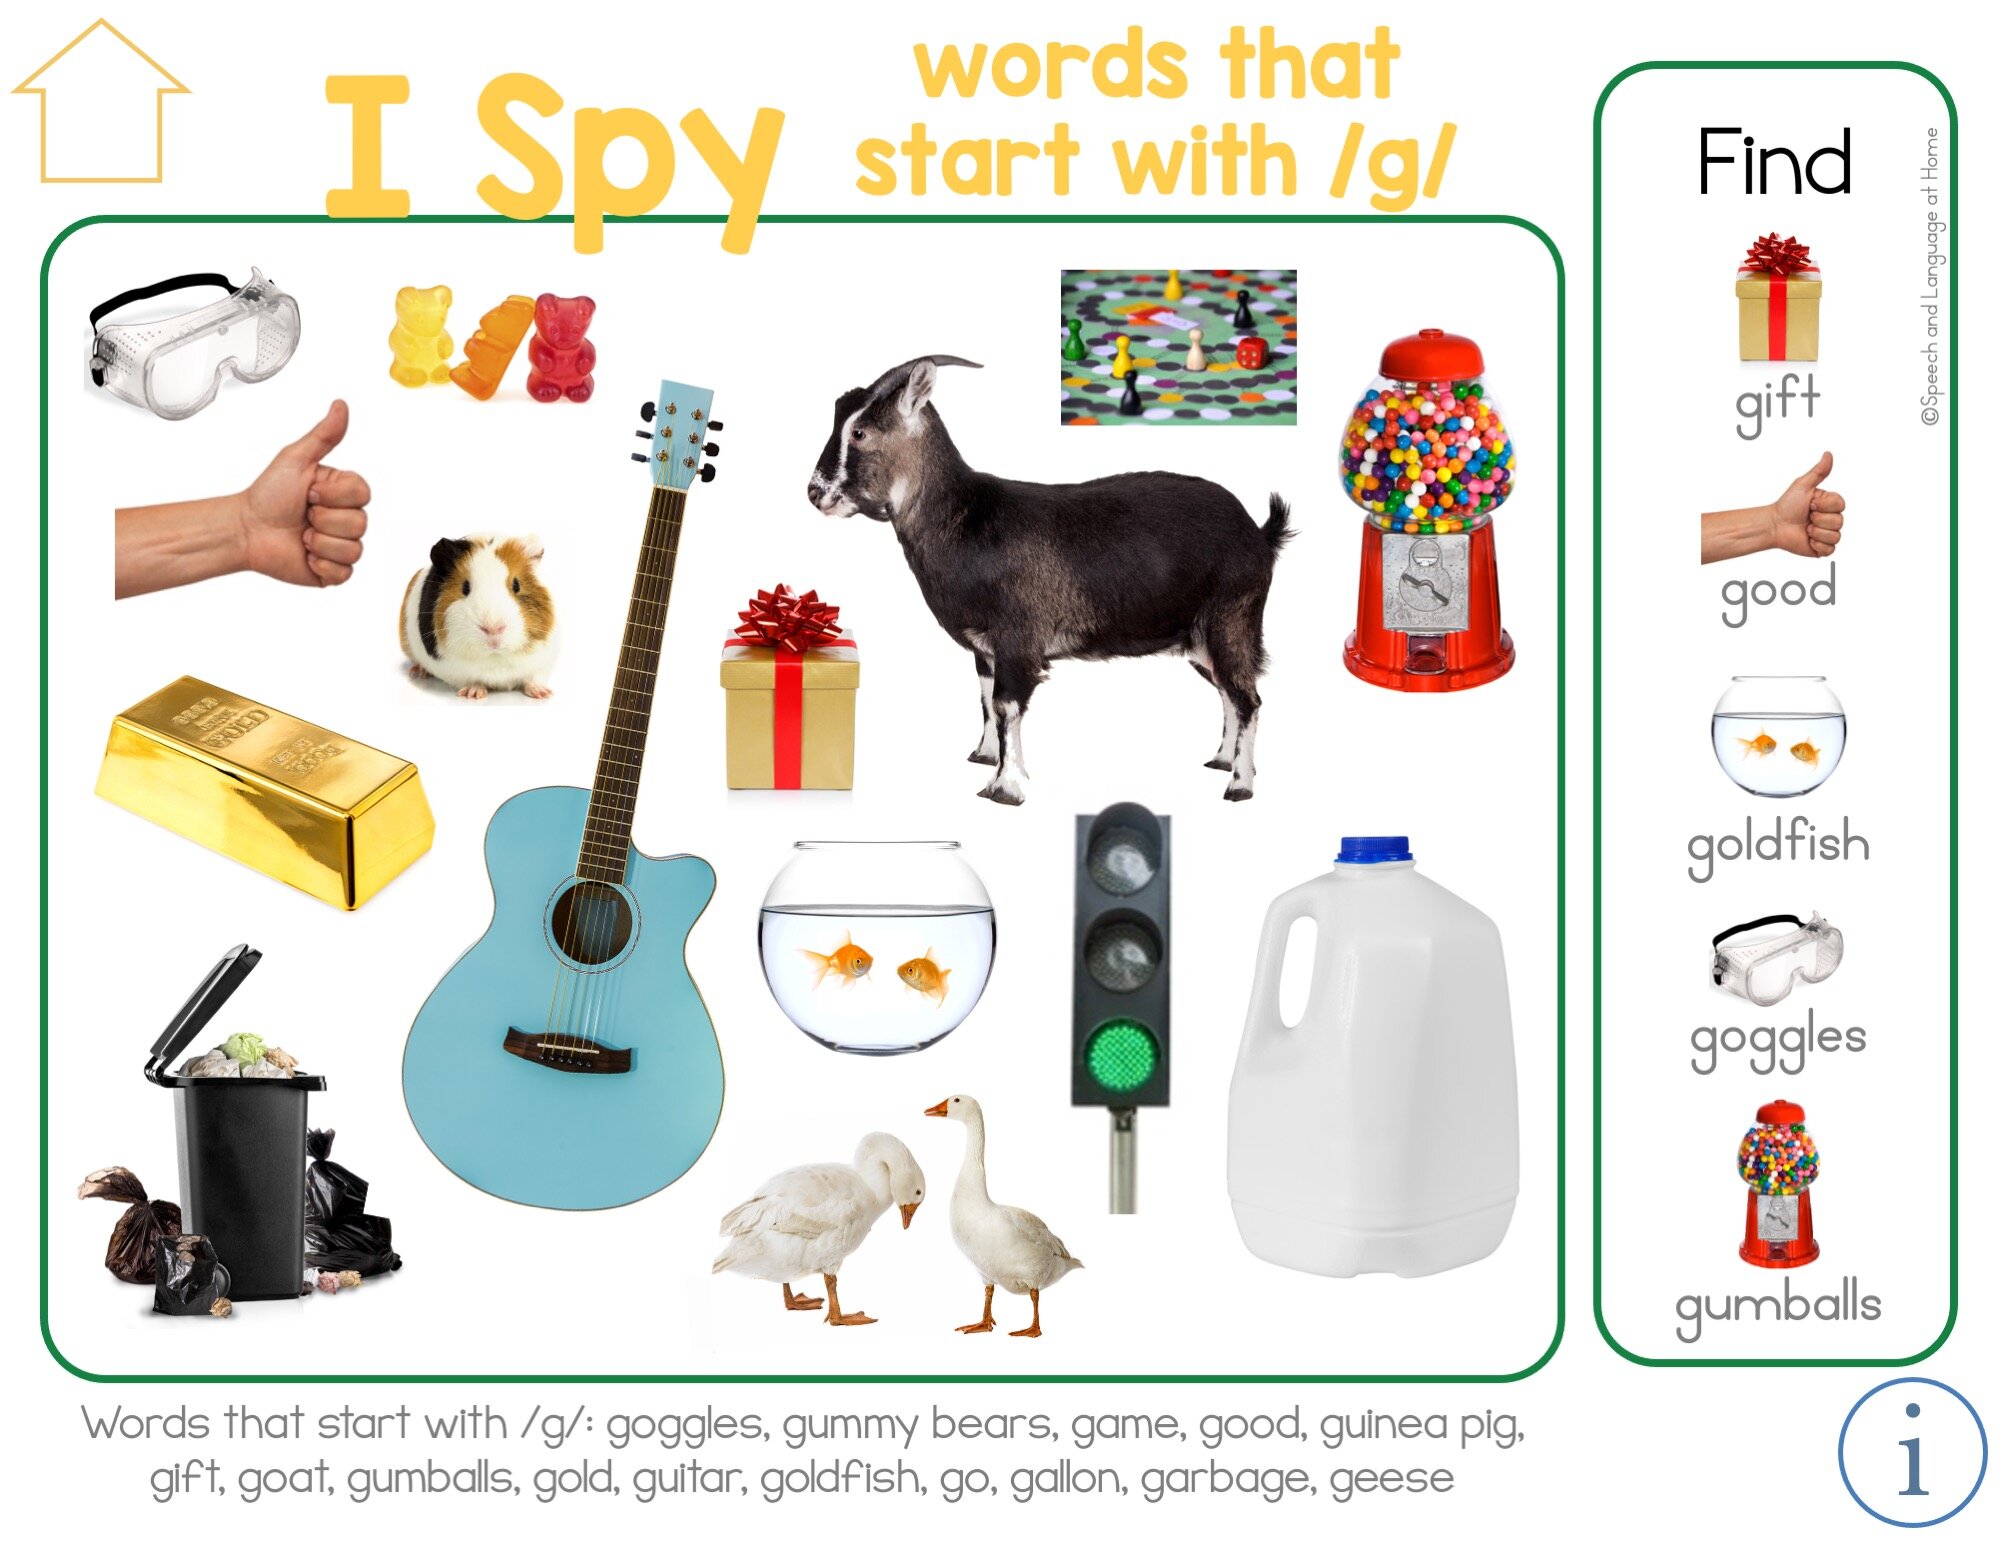 Speech Therapy Activity Idea for Toddlers I Spy Words that start with g